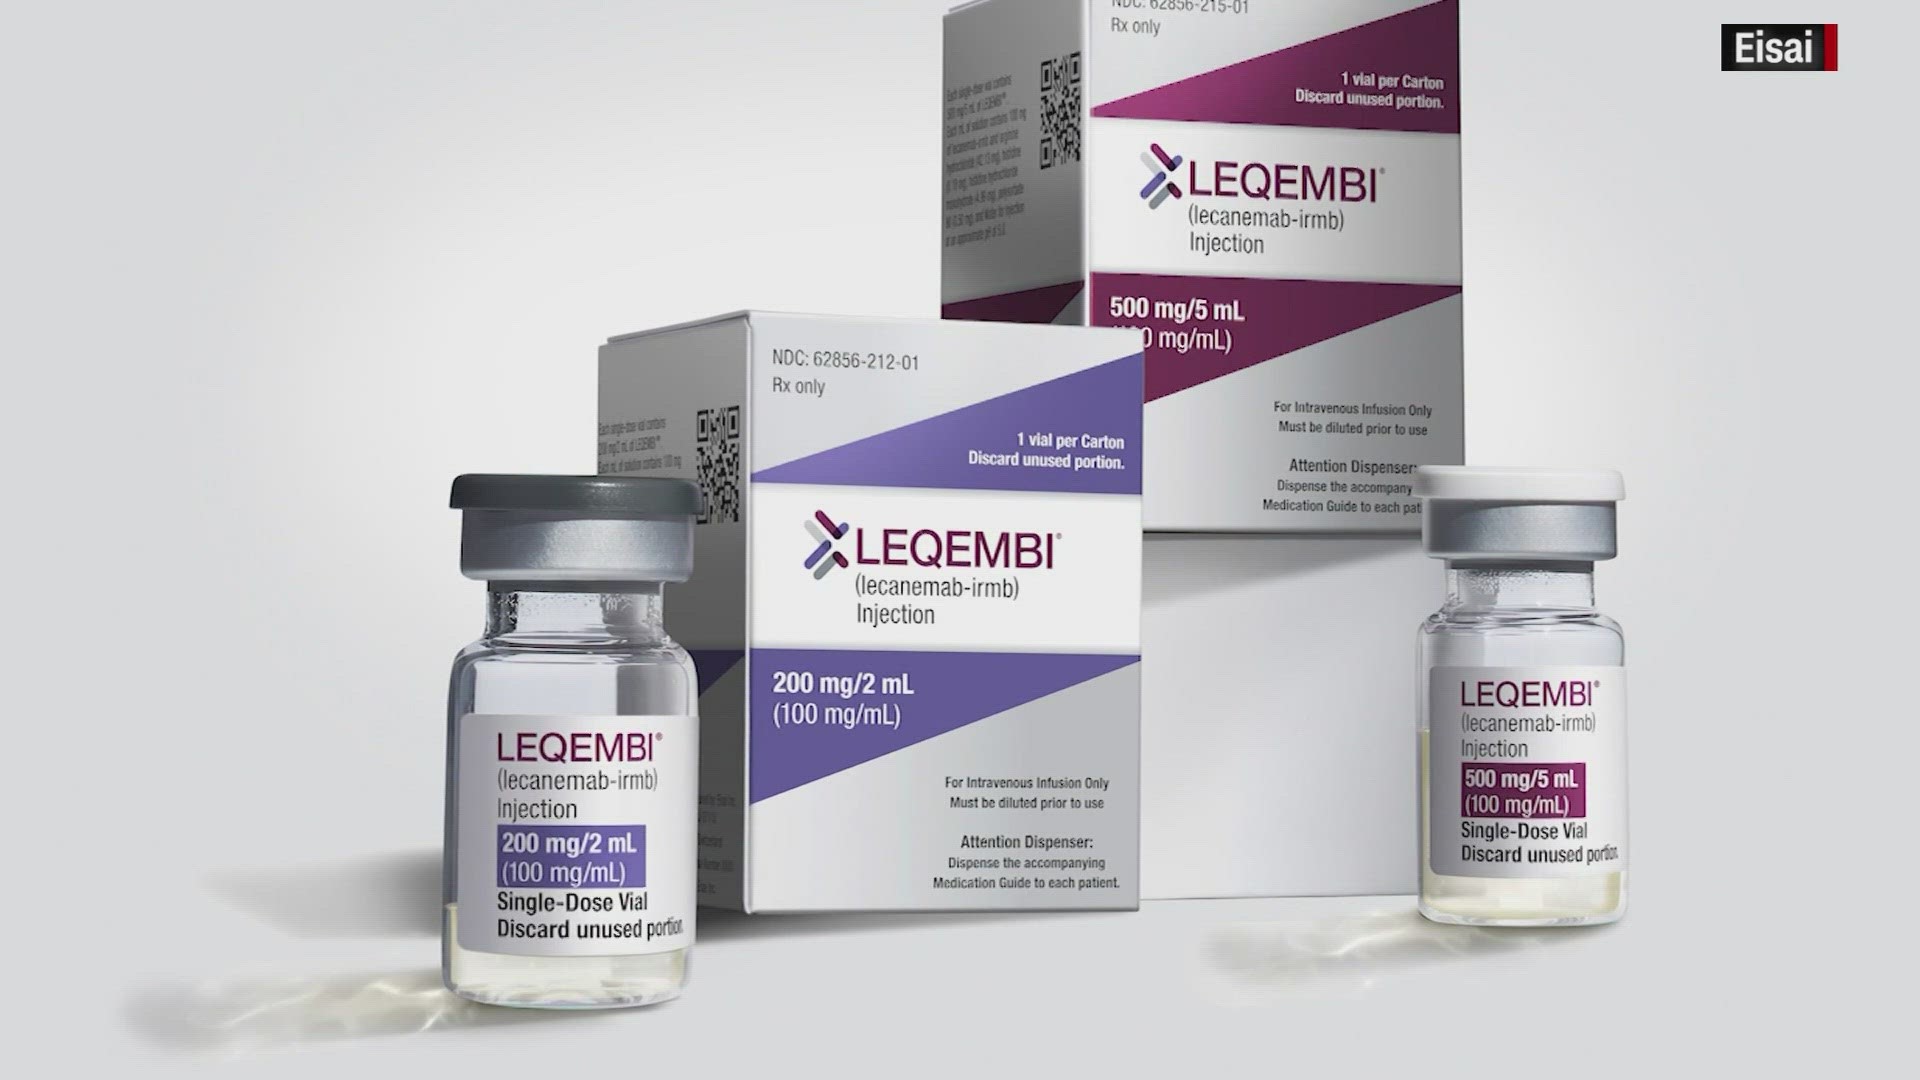 The drug Leqembi is reportedly showing a lot of promise for Alzheimers patients.